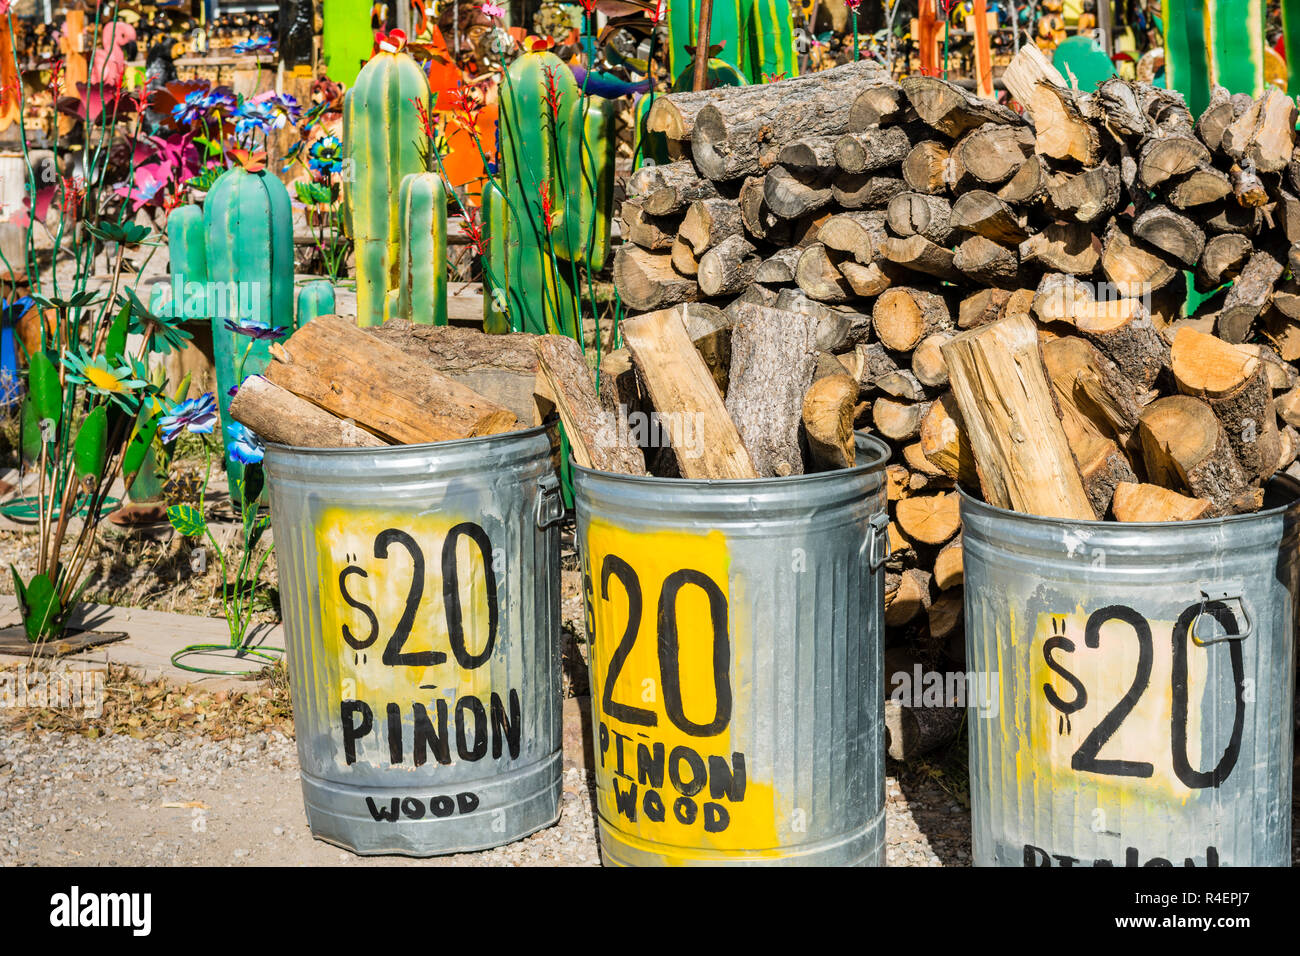 Piñon firewood for sale at a shop selling colorful Mexican imports, Ruidoso, New Mexico, USA. Stock Photo